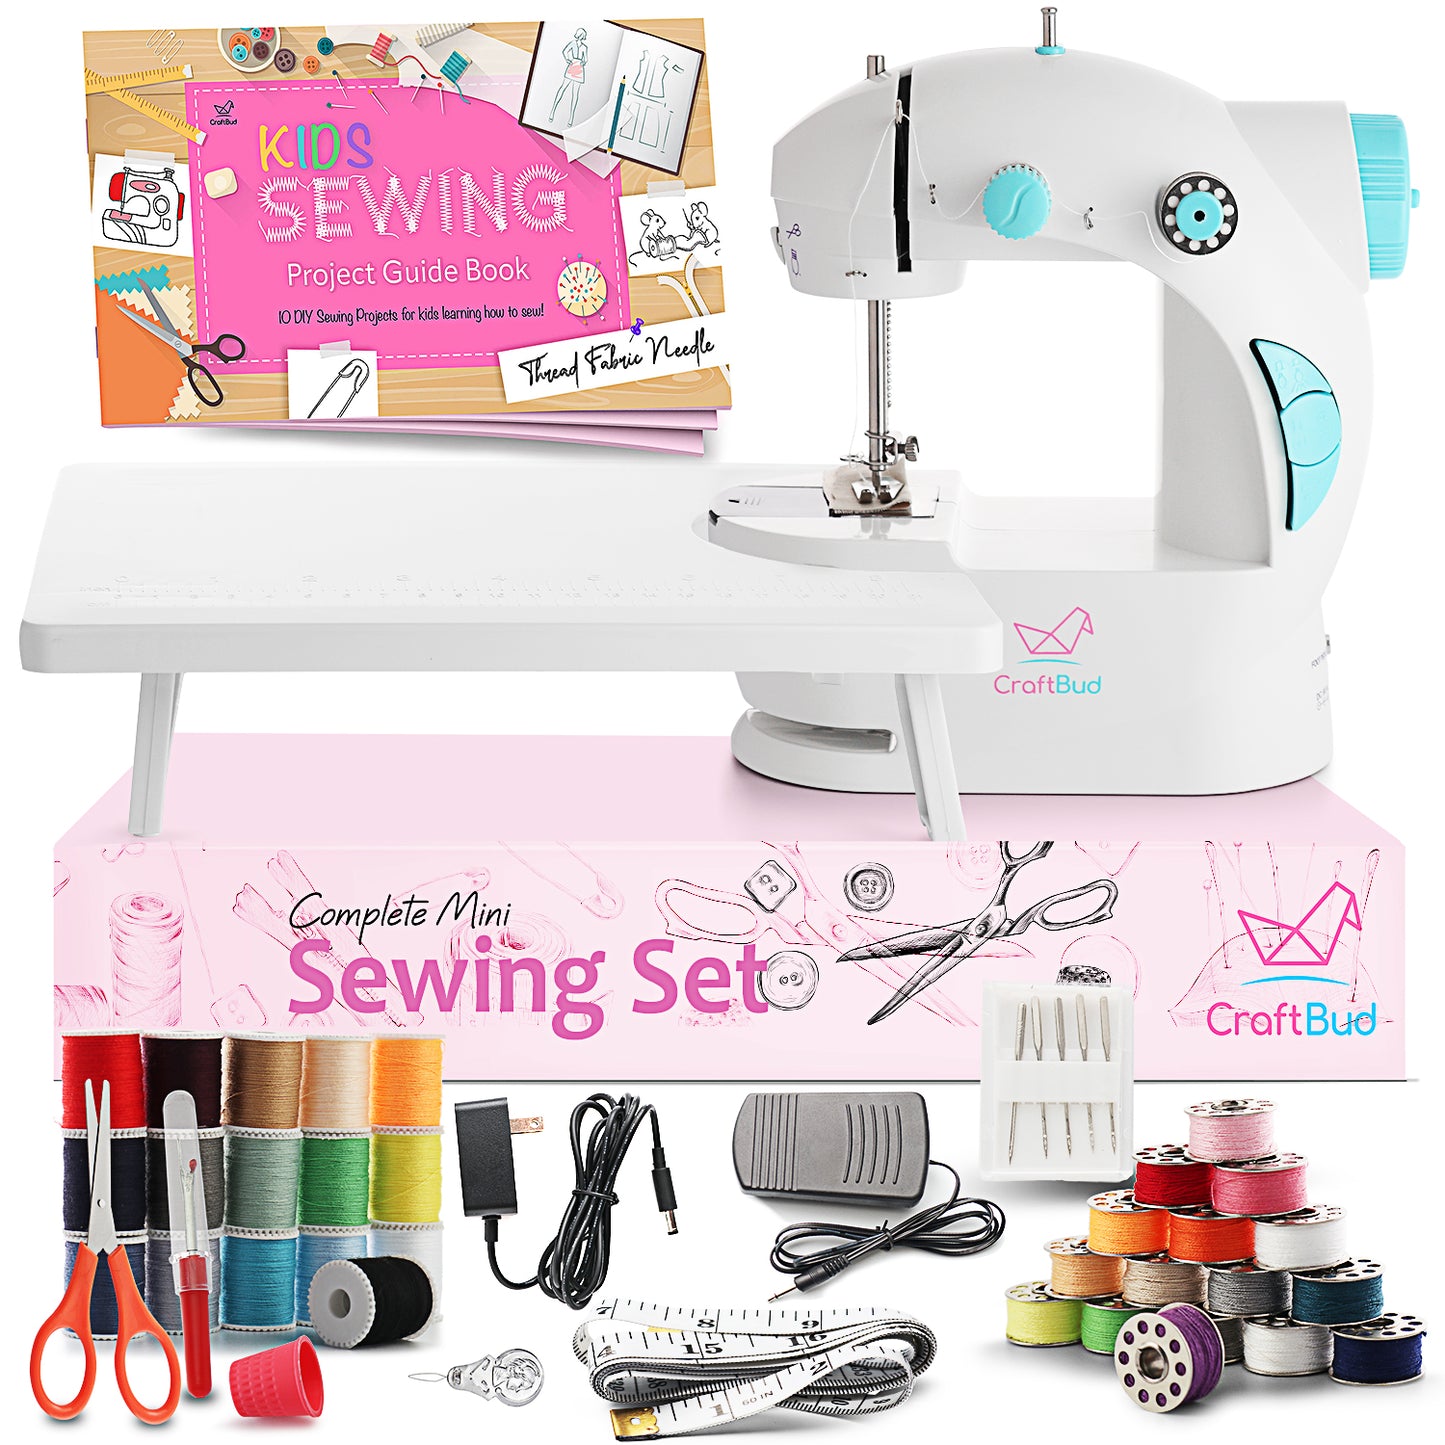 See and Sew: A Sewing Book for Children [Book]